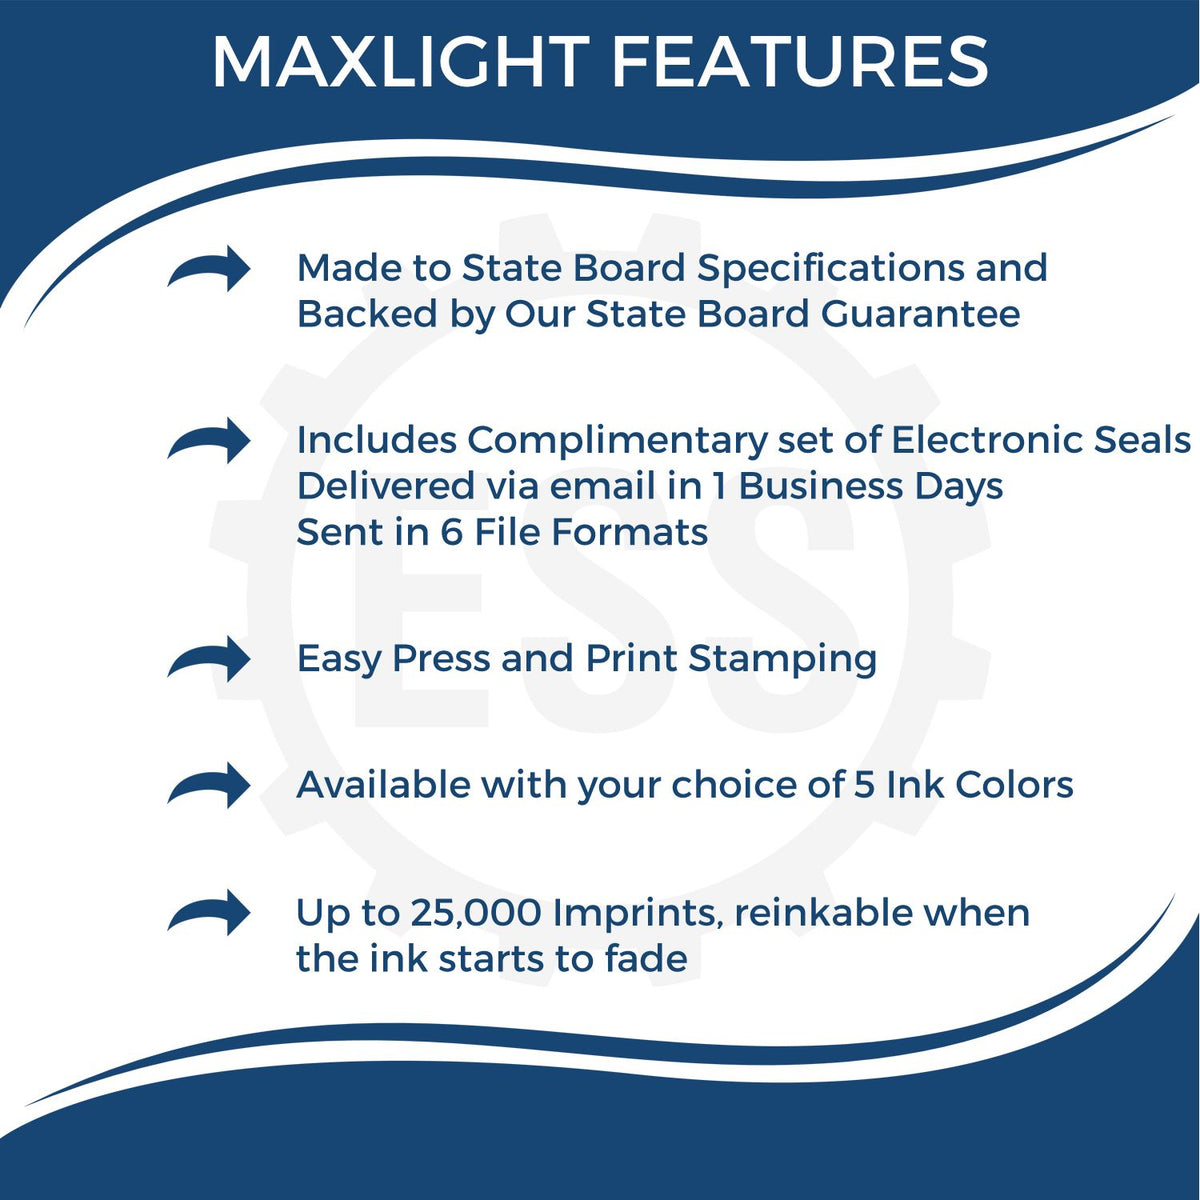 A picture of an infographic highlighting the selling points for the Premium MaxLight Pre-Inked Guam Geology Stamp